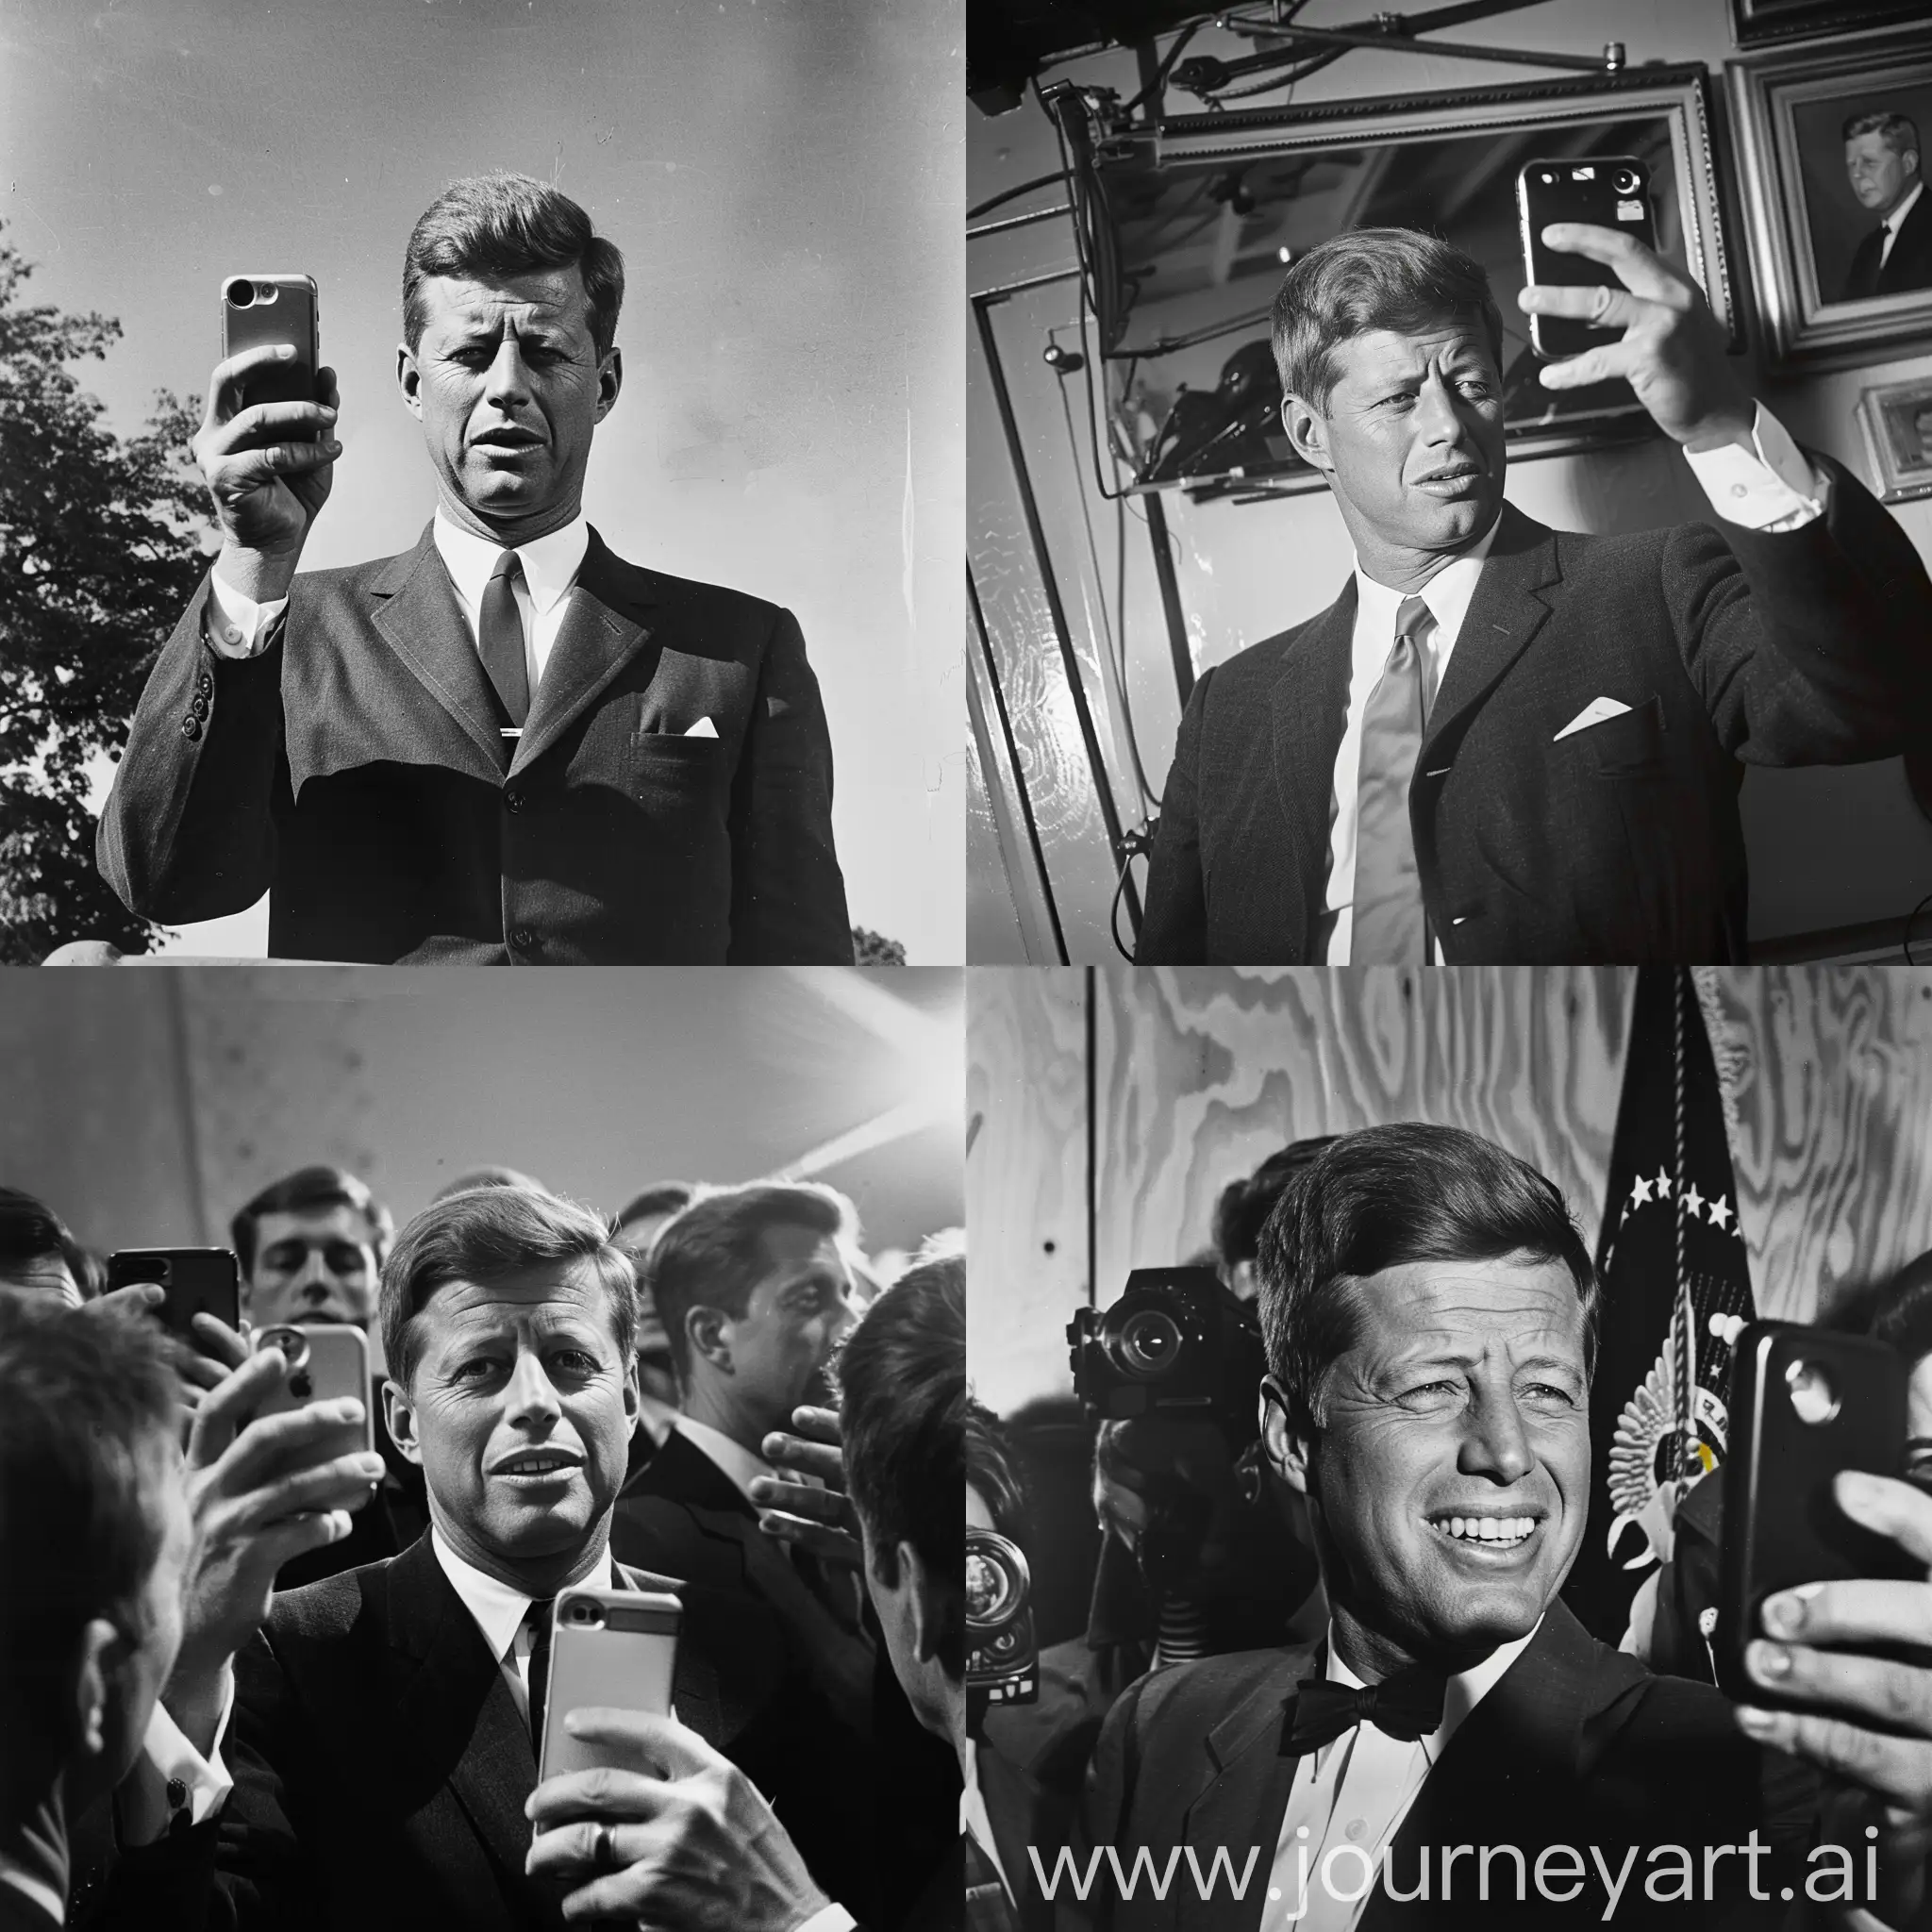 John-Kennedy-Captures-Final-Moments-Selfie-Before-Tragedy